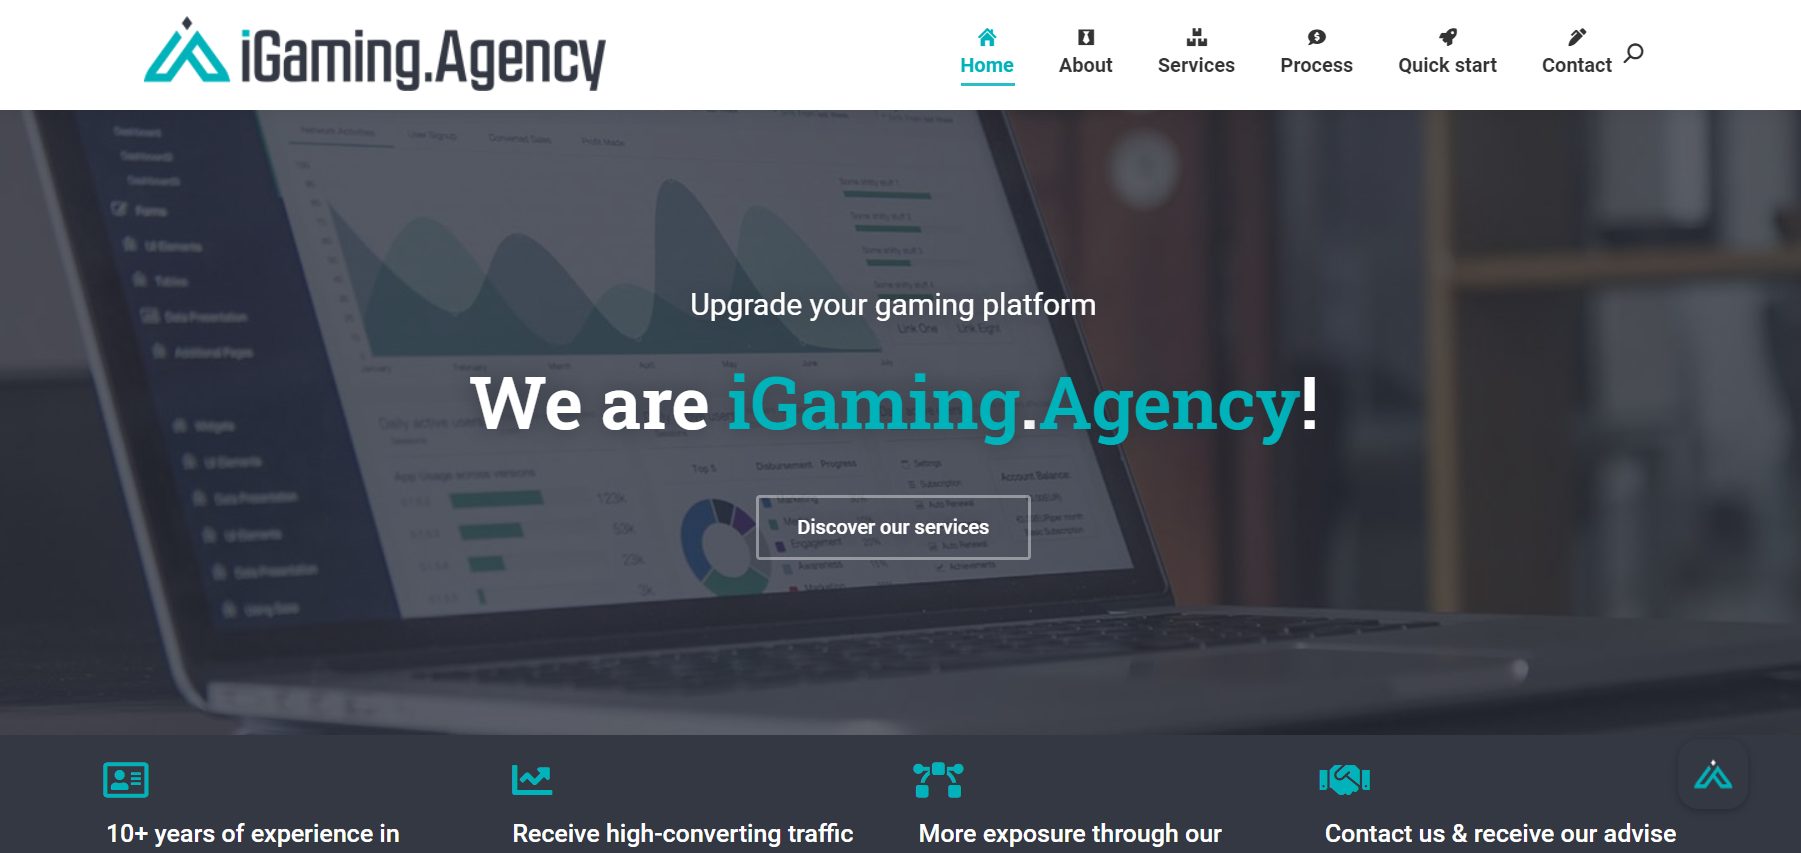 iGaming.Agency